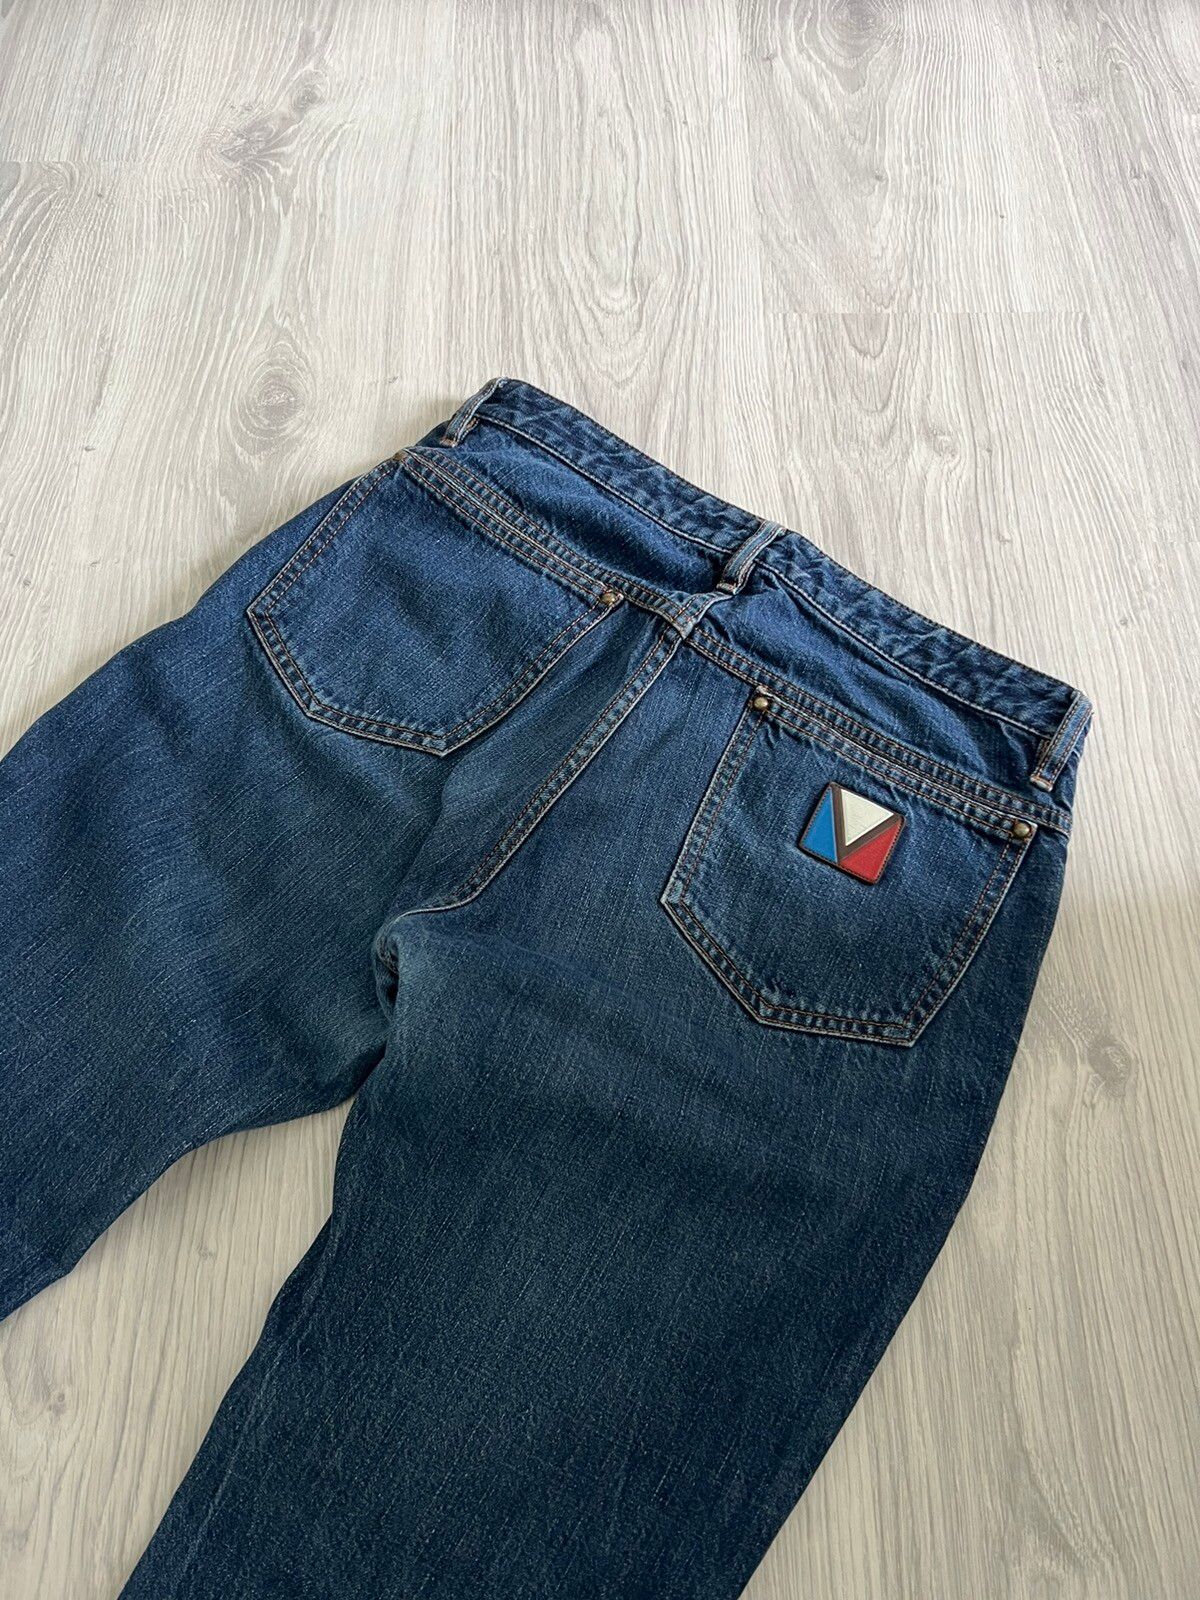 Louis Vuitton Workwear Denim Carpenter Pants 1ABJD1, Blue, Please Contact Seller, If Other Size Needed